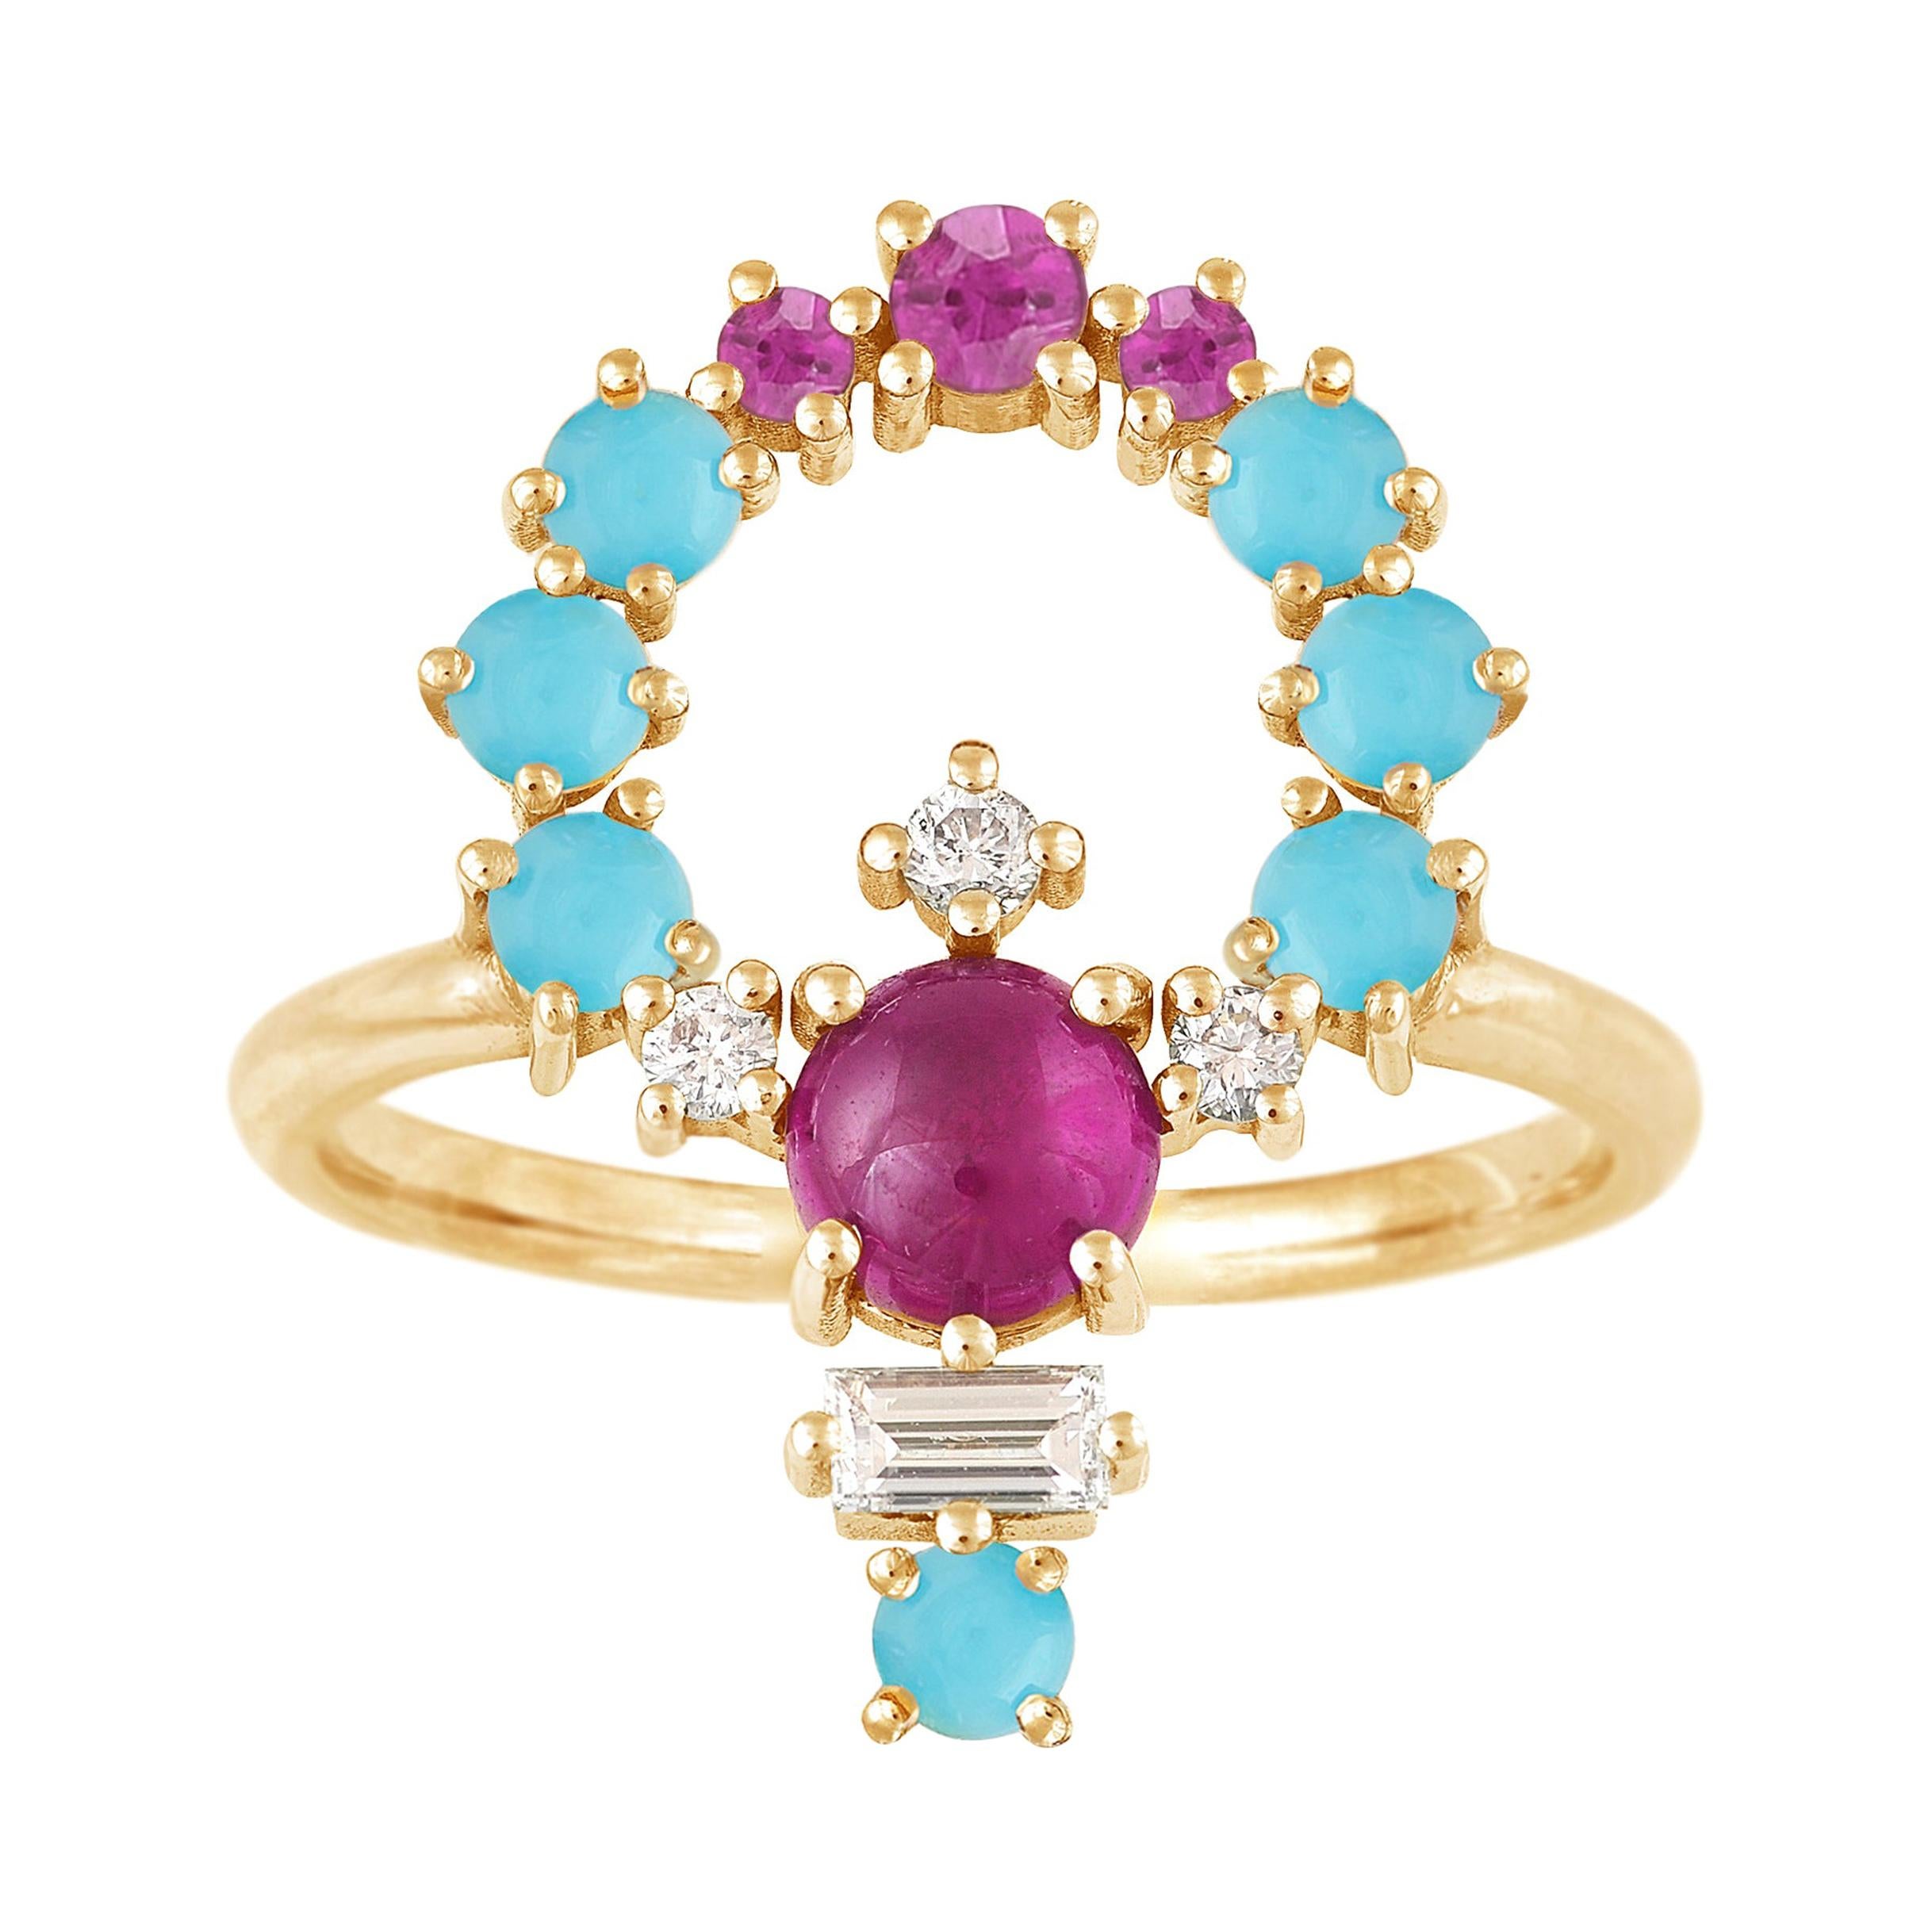 Colorful 18 Karat Gold Ring with Pink Sapphires, Diamonds and Turquoise